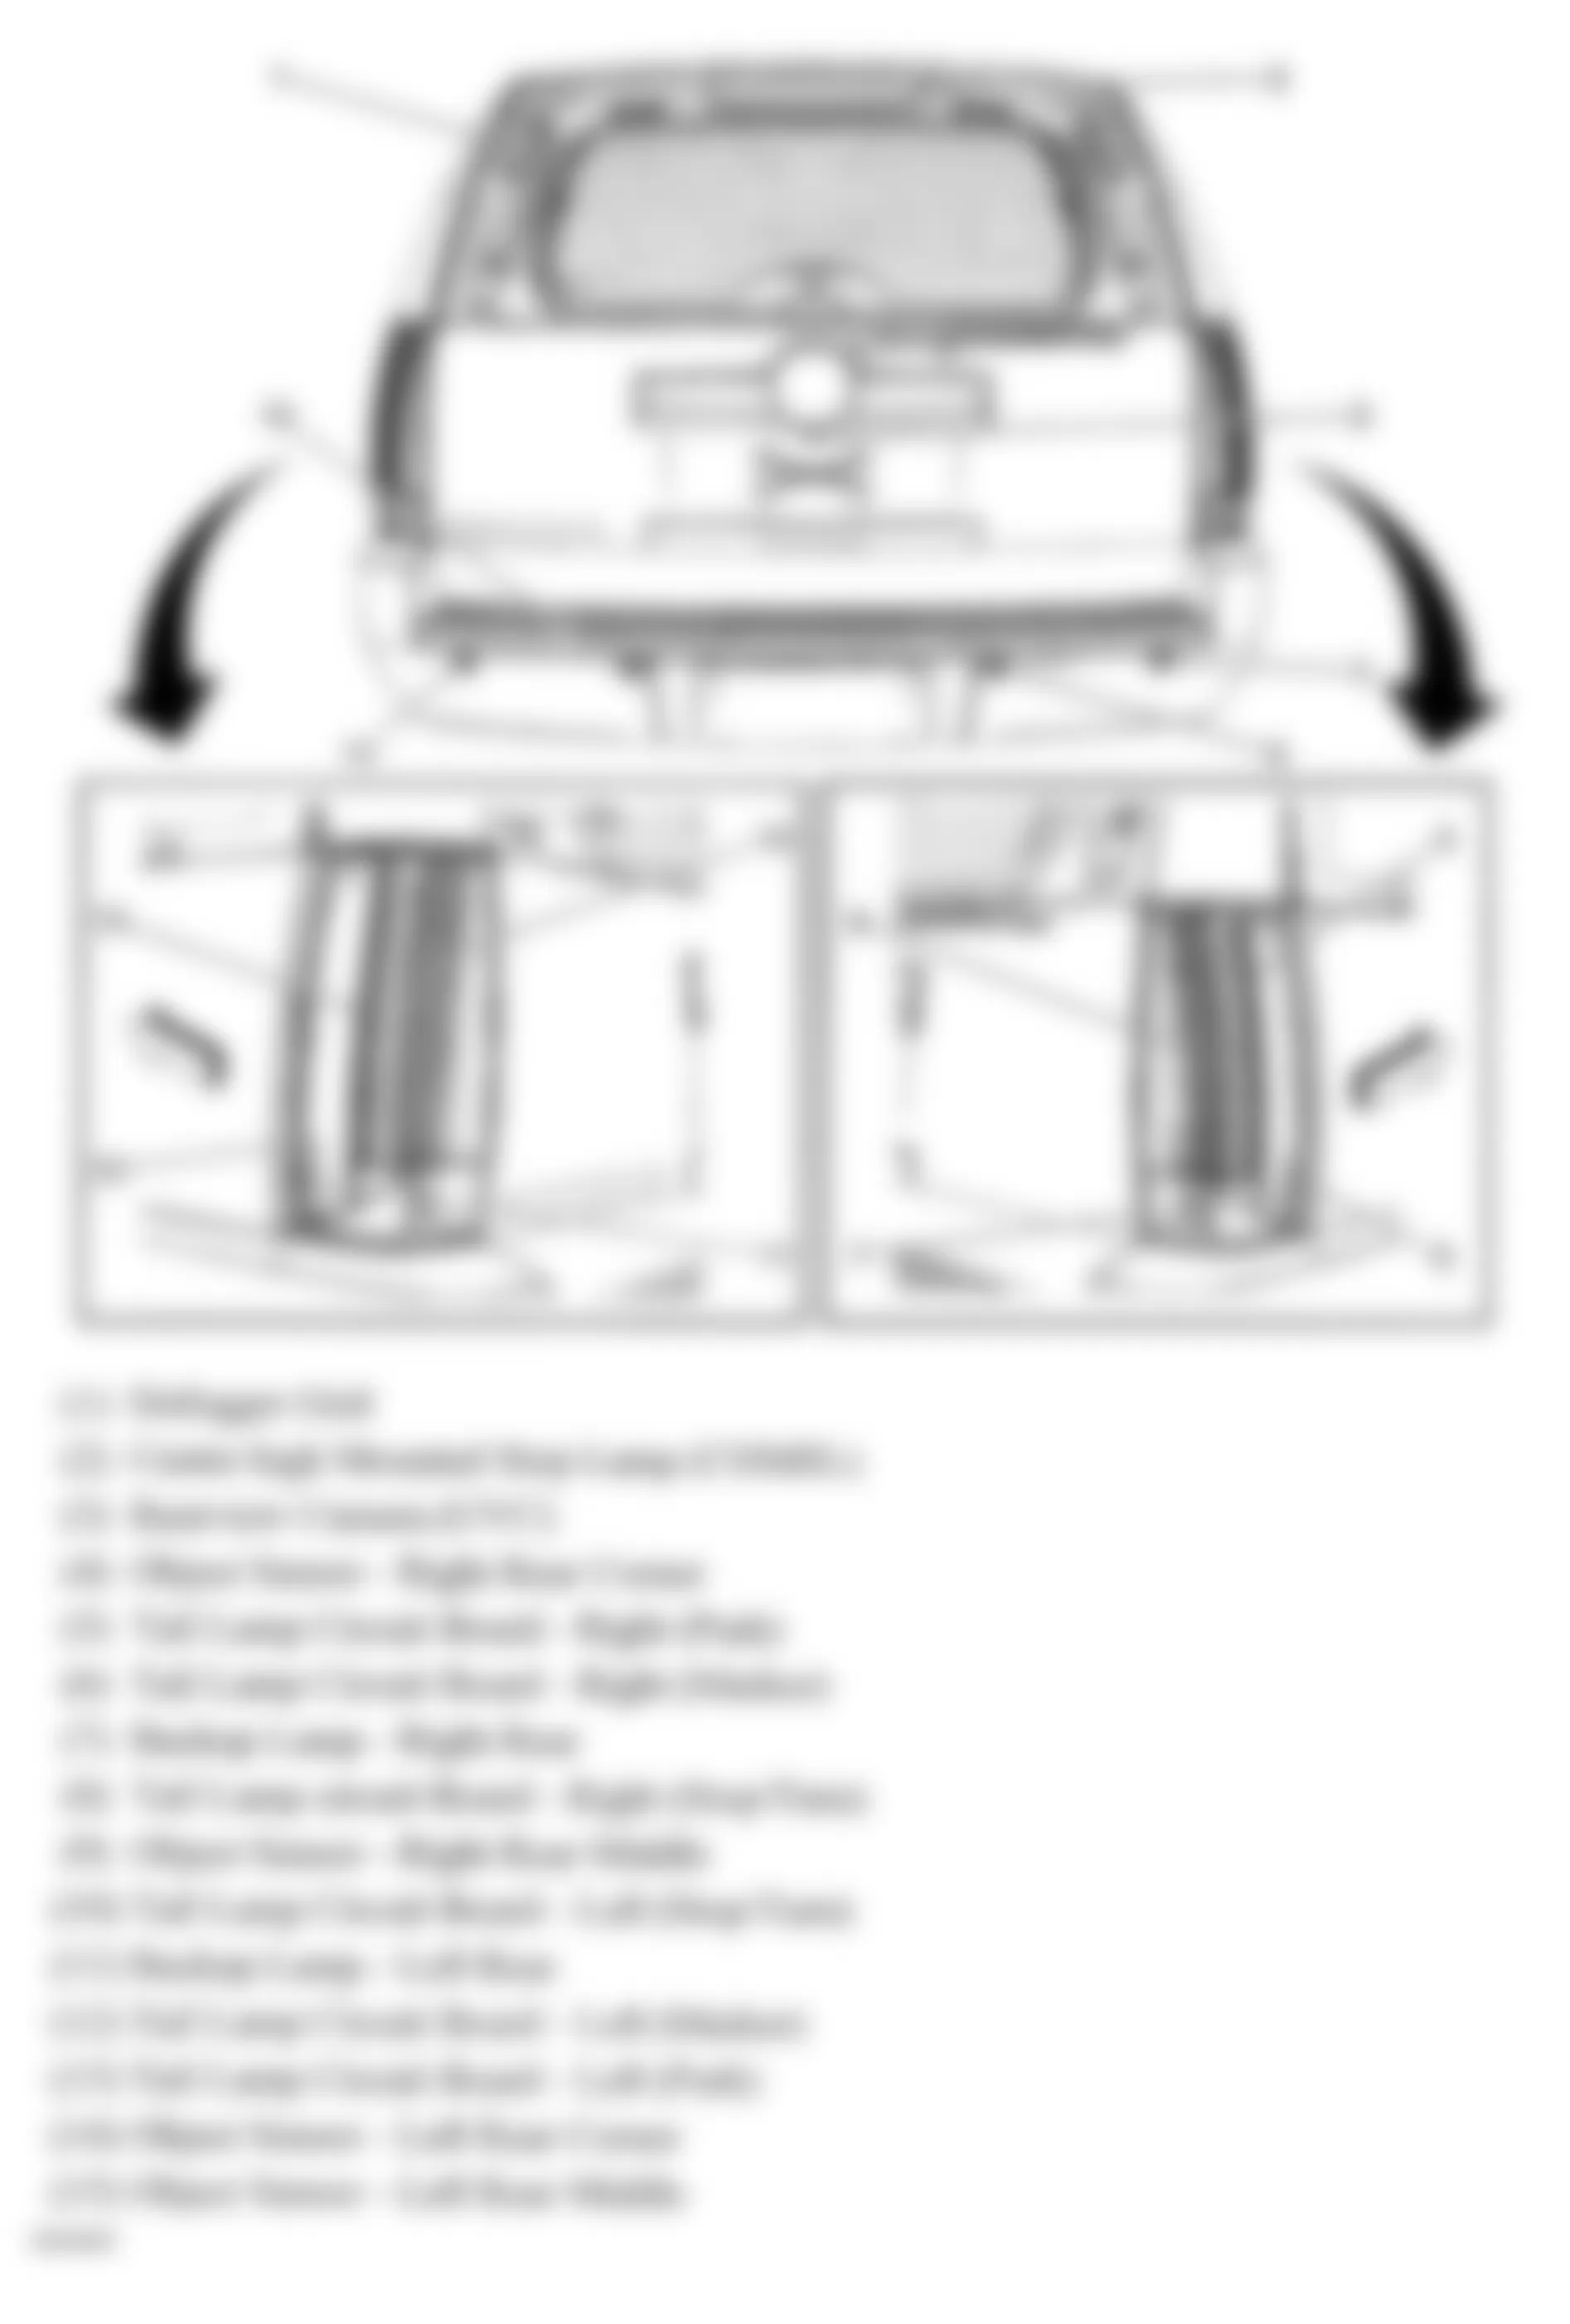 GMC Yukon Denali 2009 - Component Locations -  Rear Of Vehicle (Tahoe & Escalade W/One Piece Liftgate)